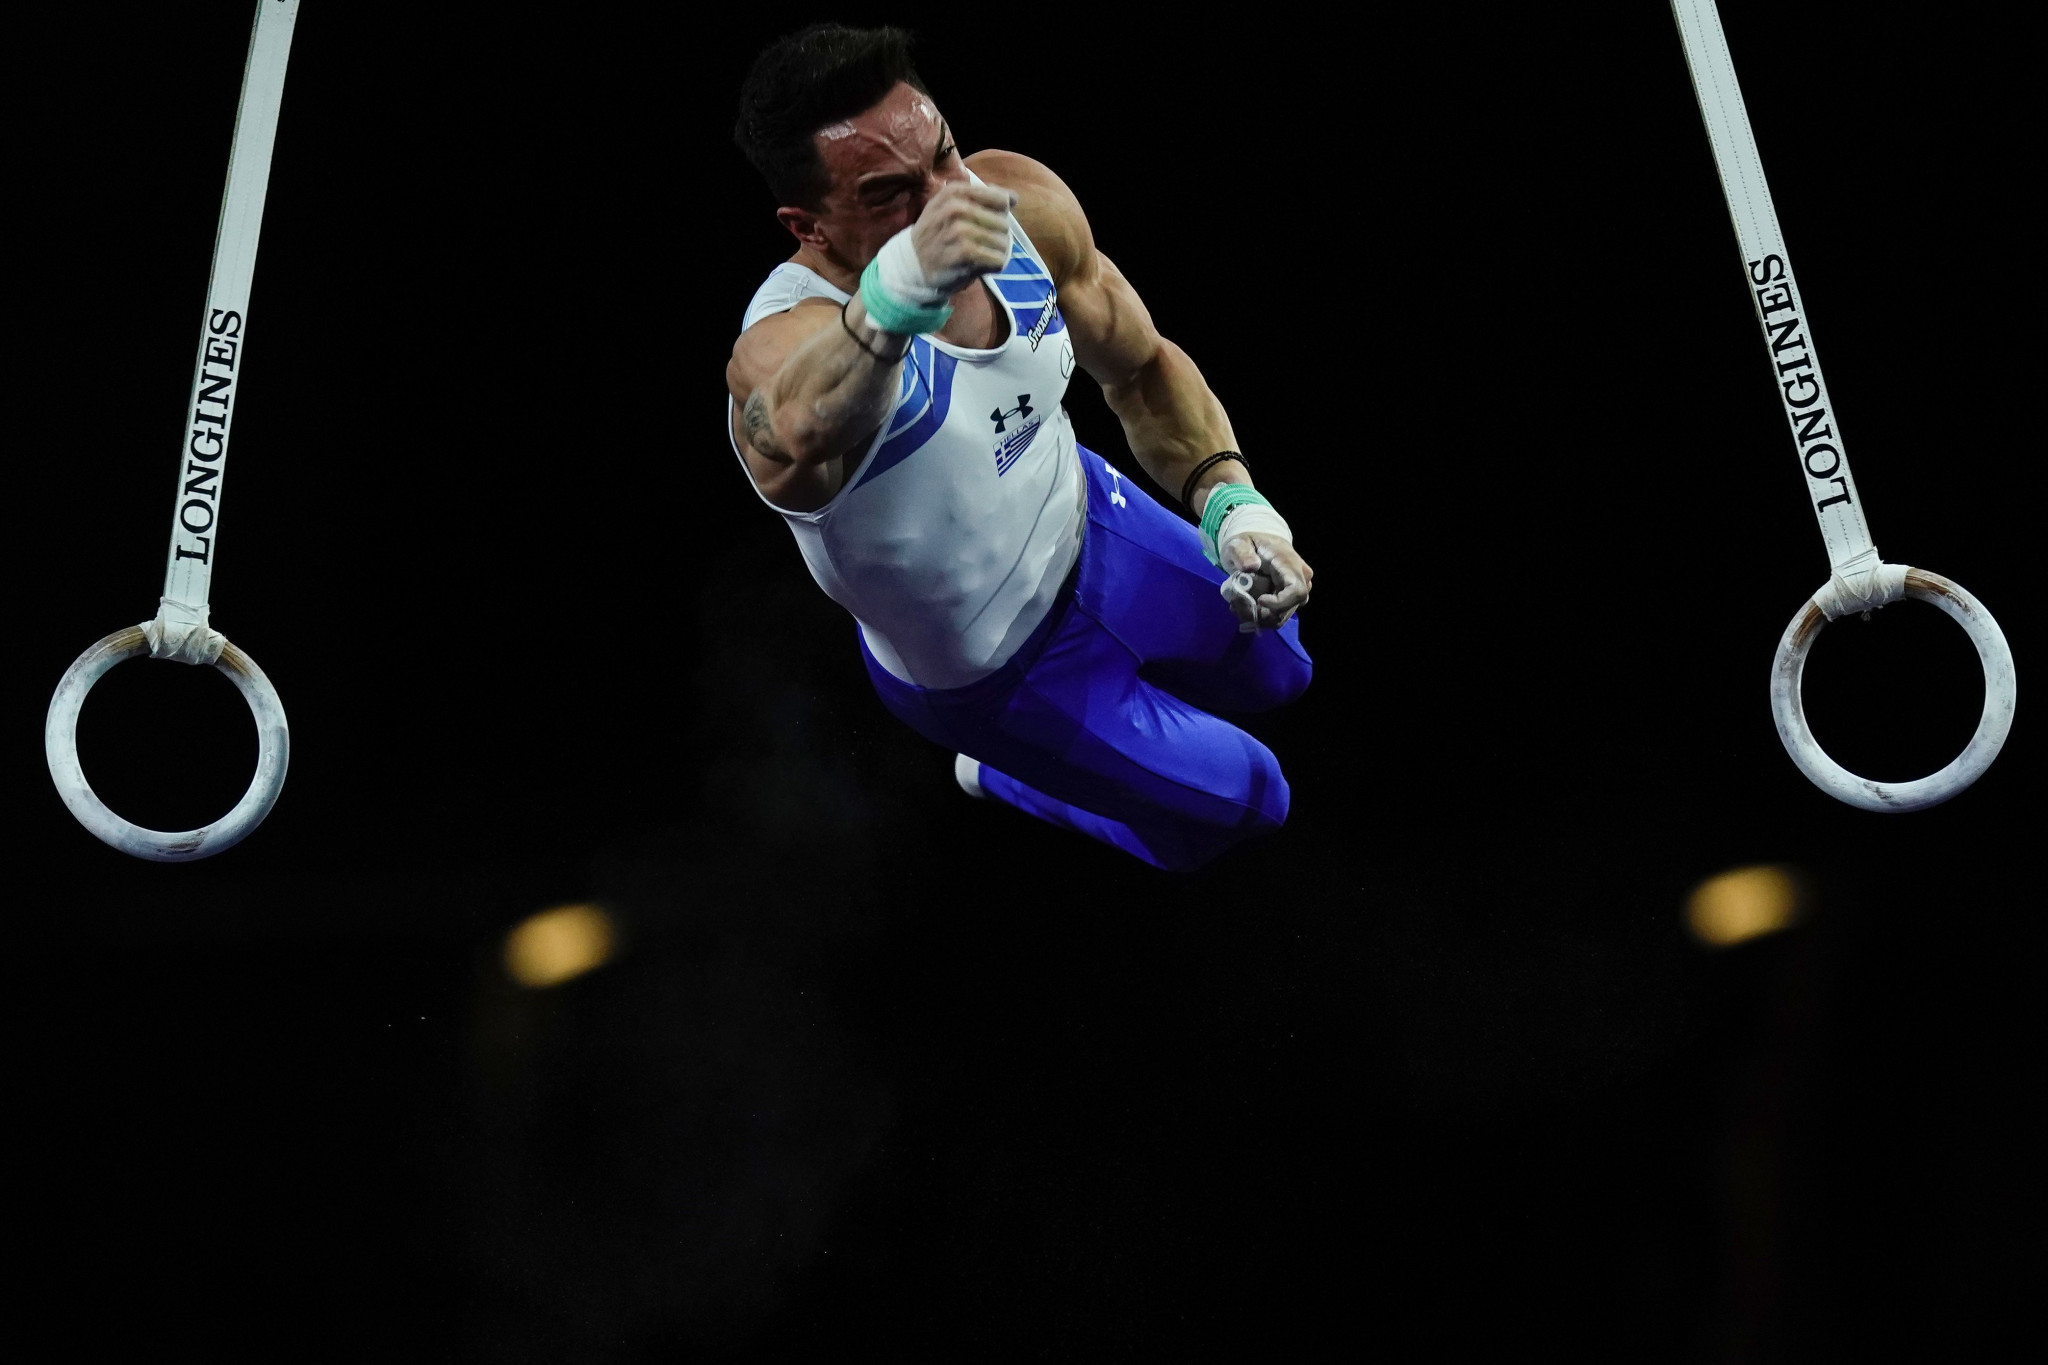 Olympic champion Petrounias tops rings qualification at FIG Apparatus World Cup